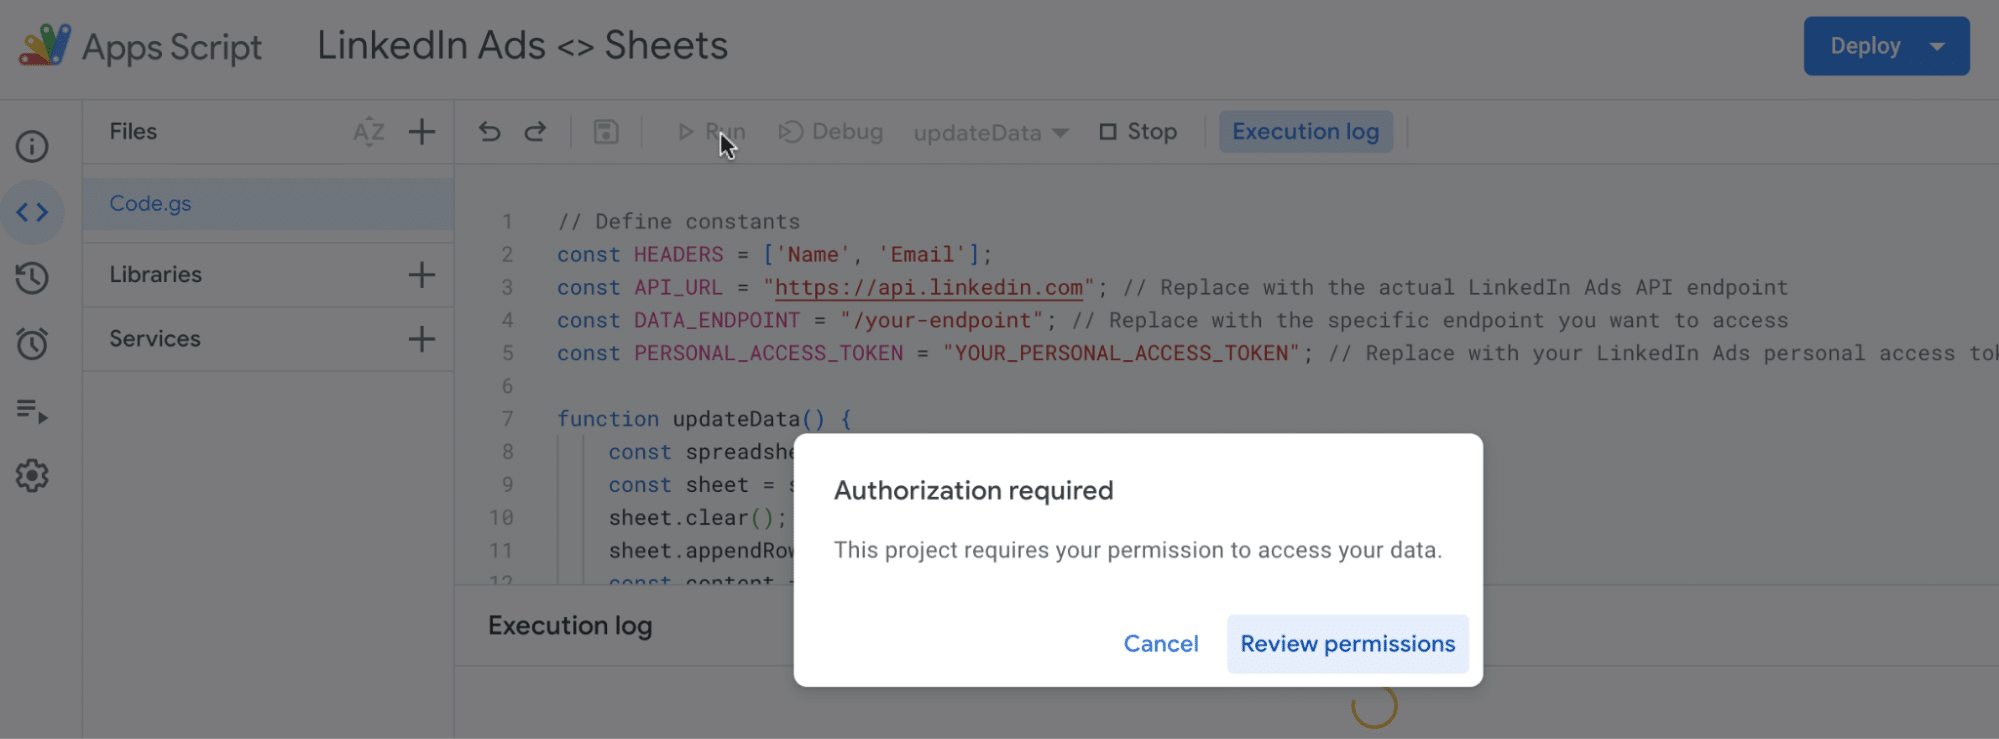 Apps Script will ask for permission to access your accounts.